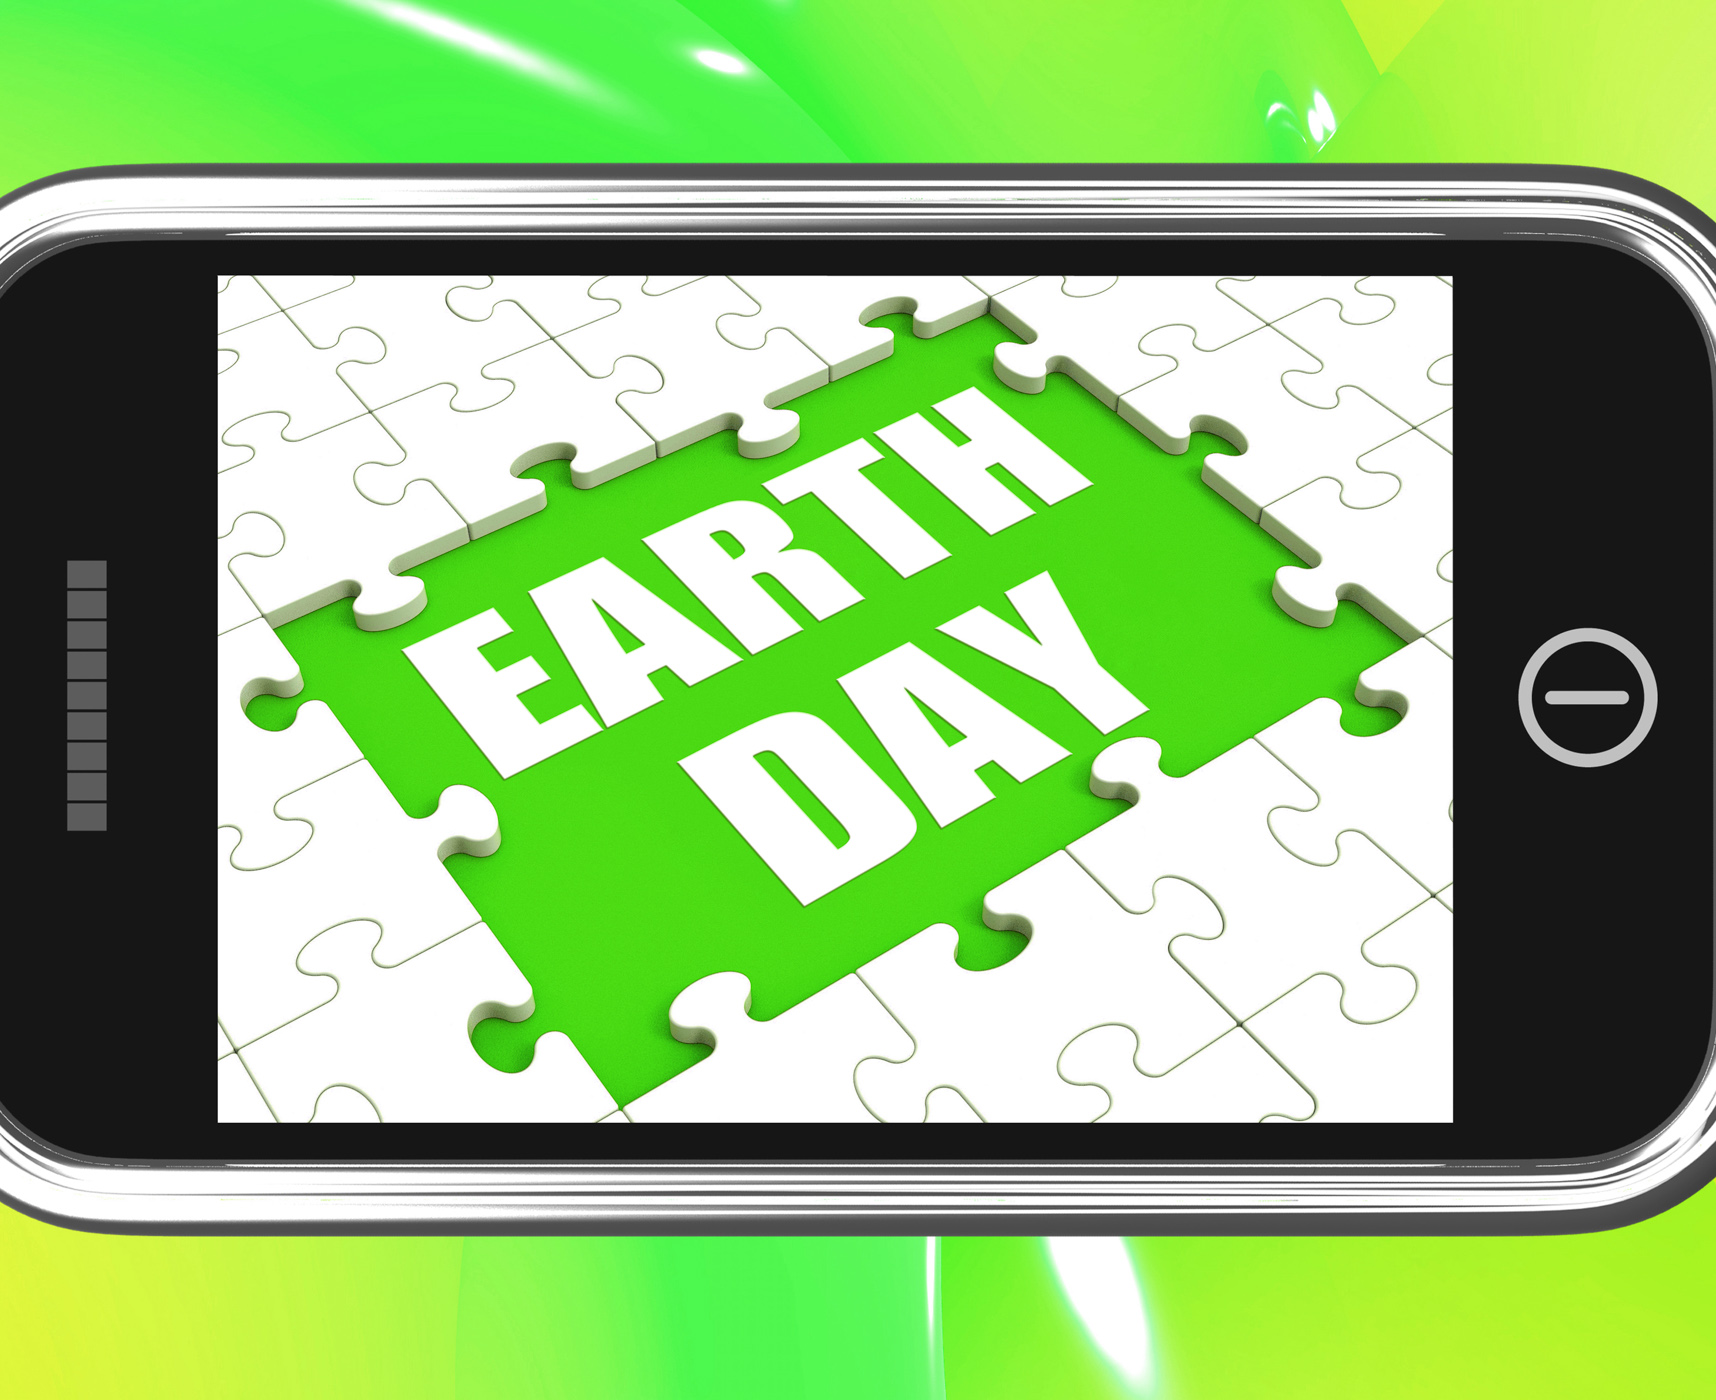 Earth day tablet shows environmentally friendly sustainable and renewa photo